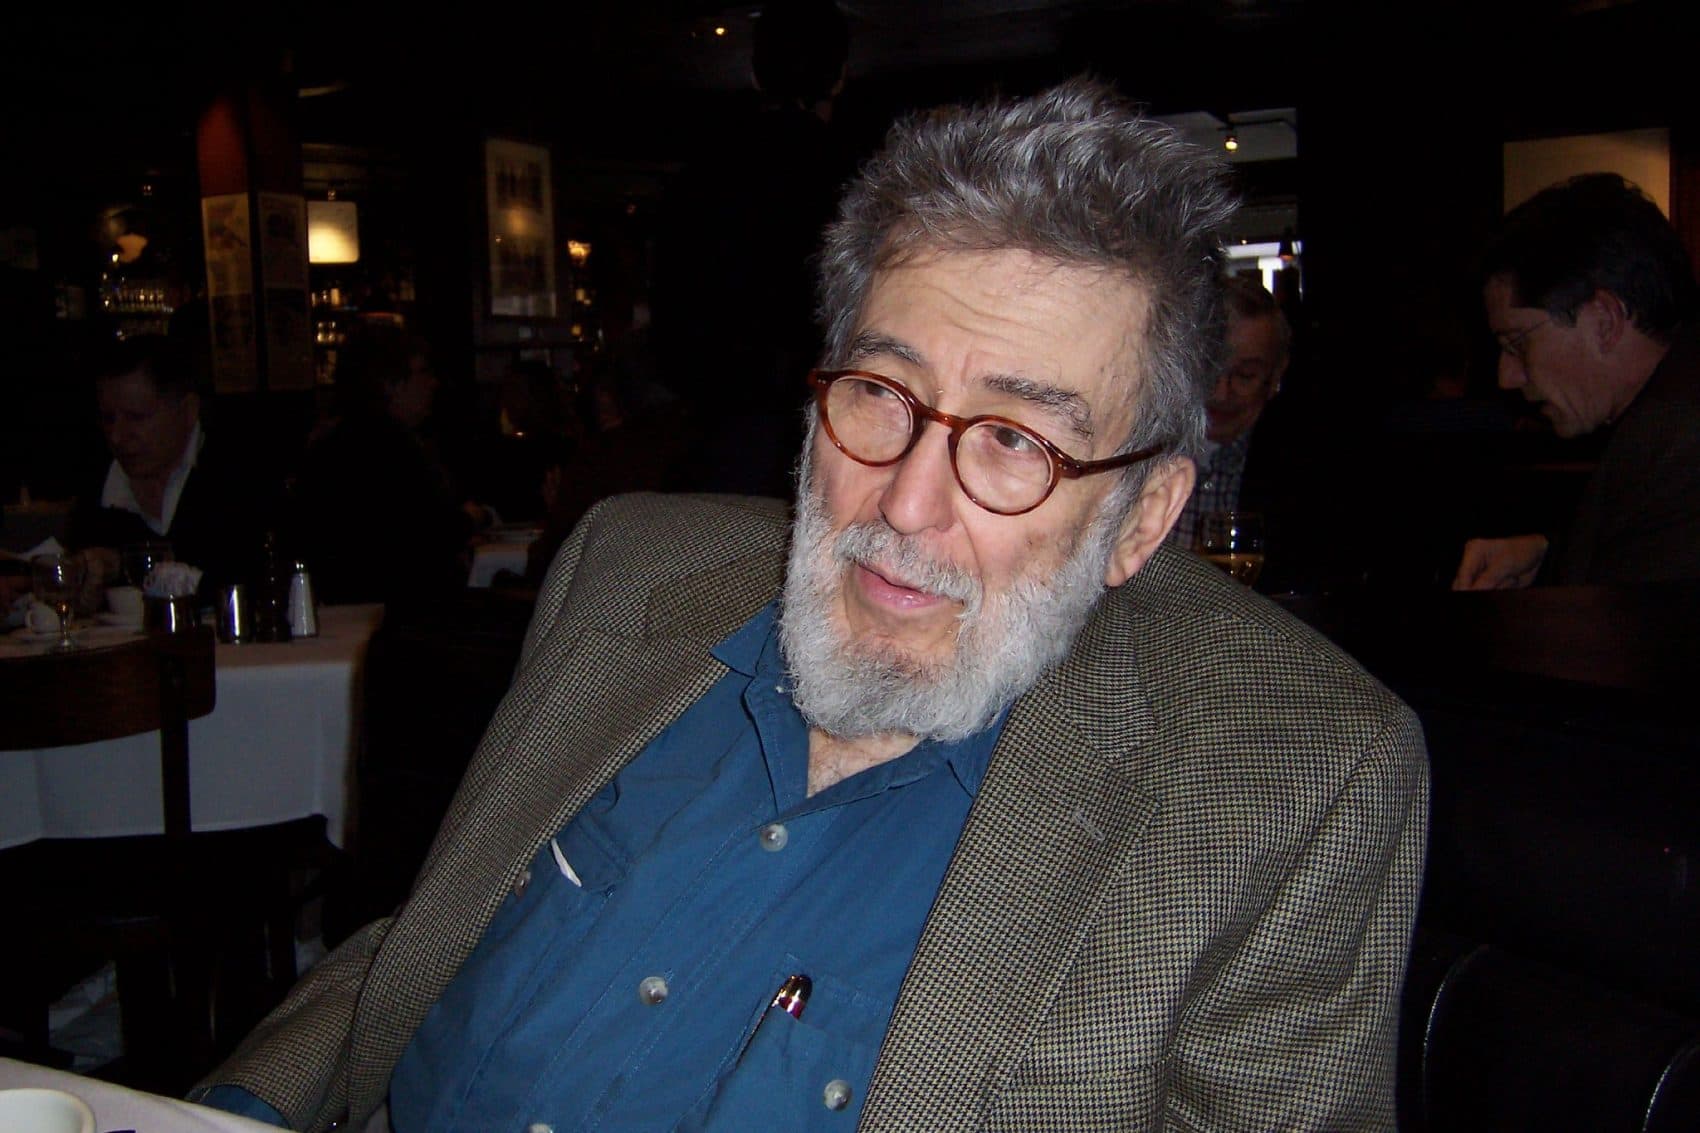 Look for his columns and criticism, writes Wendy Kaminer. Read his books. Remember him. Pictured: Nat Hentoff, who died of natural causes at his Greenwich Village home on January 7, is shown here at the Knickerbocker Club in 2004. (K. G. Schneider/Flickr)